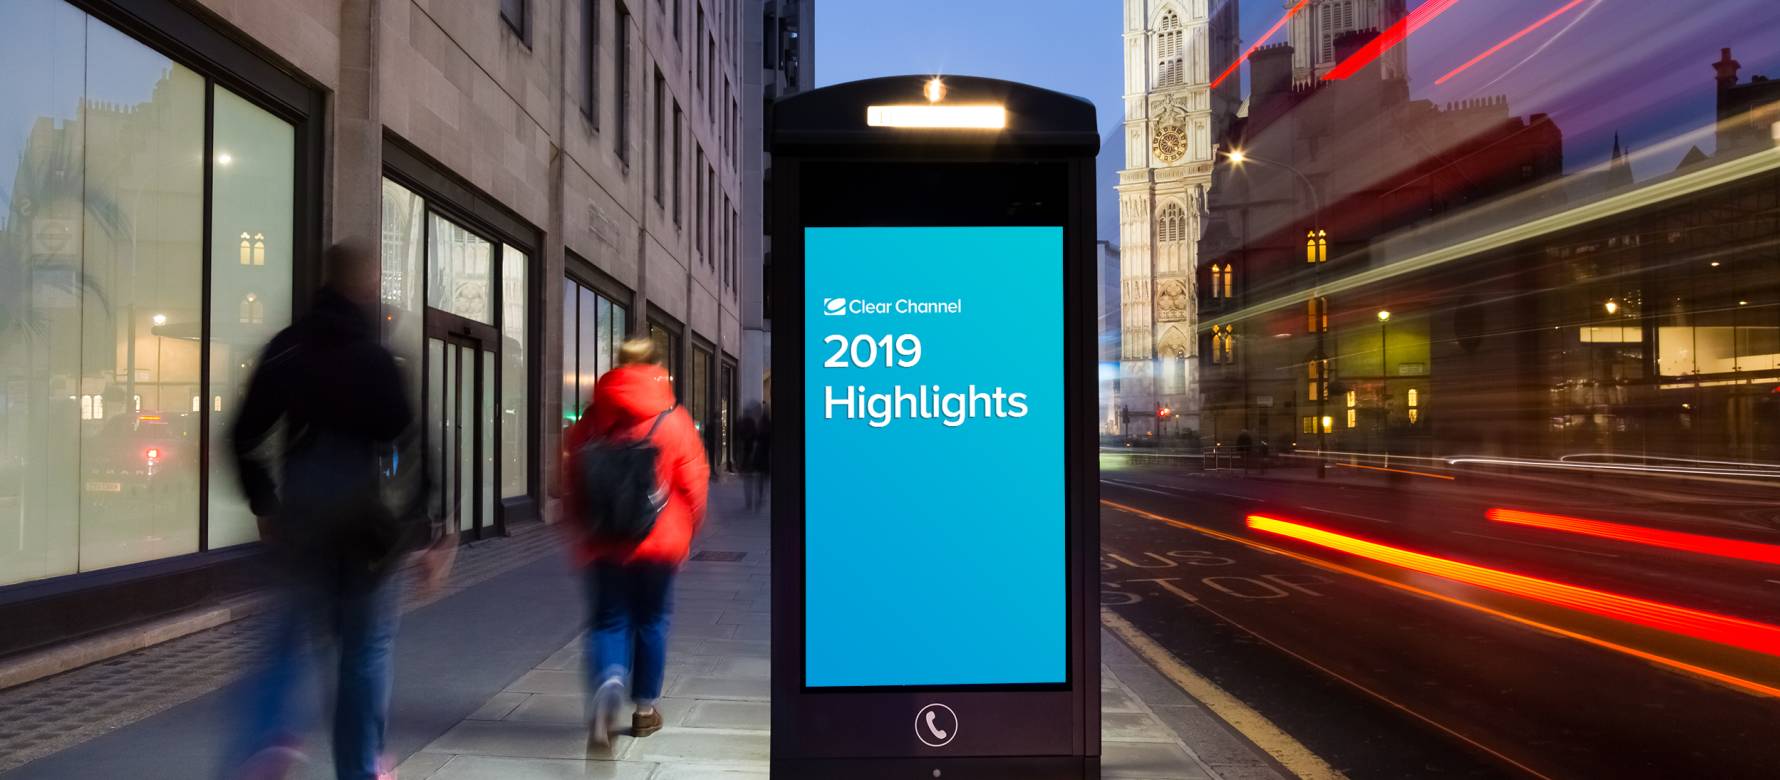 Adshel Live Phone box showing the words Clear Channel 2019 Highlights